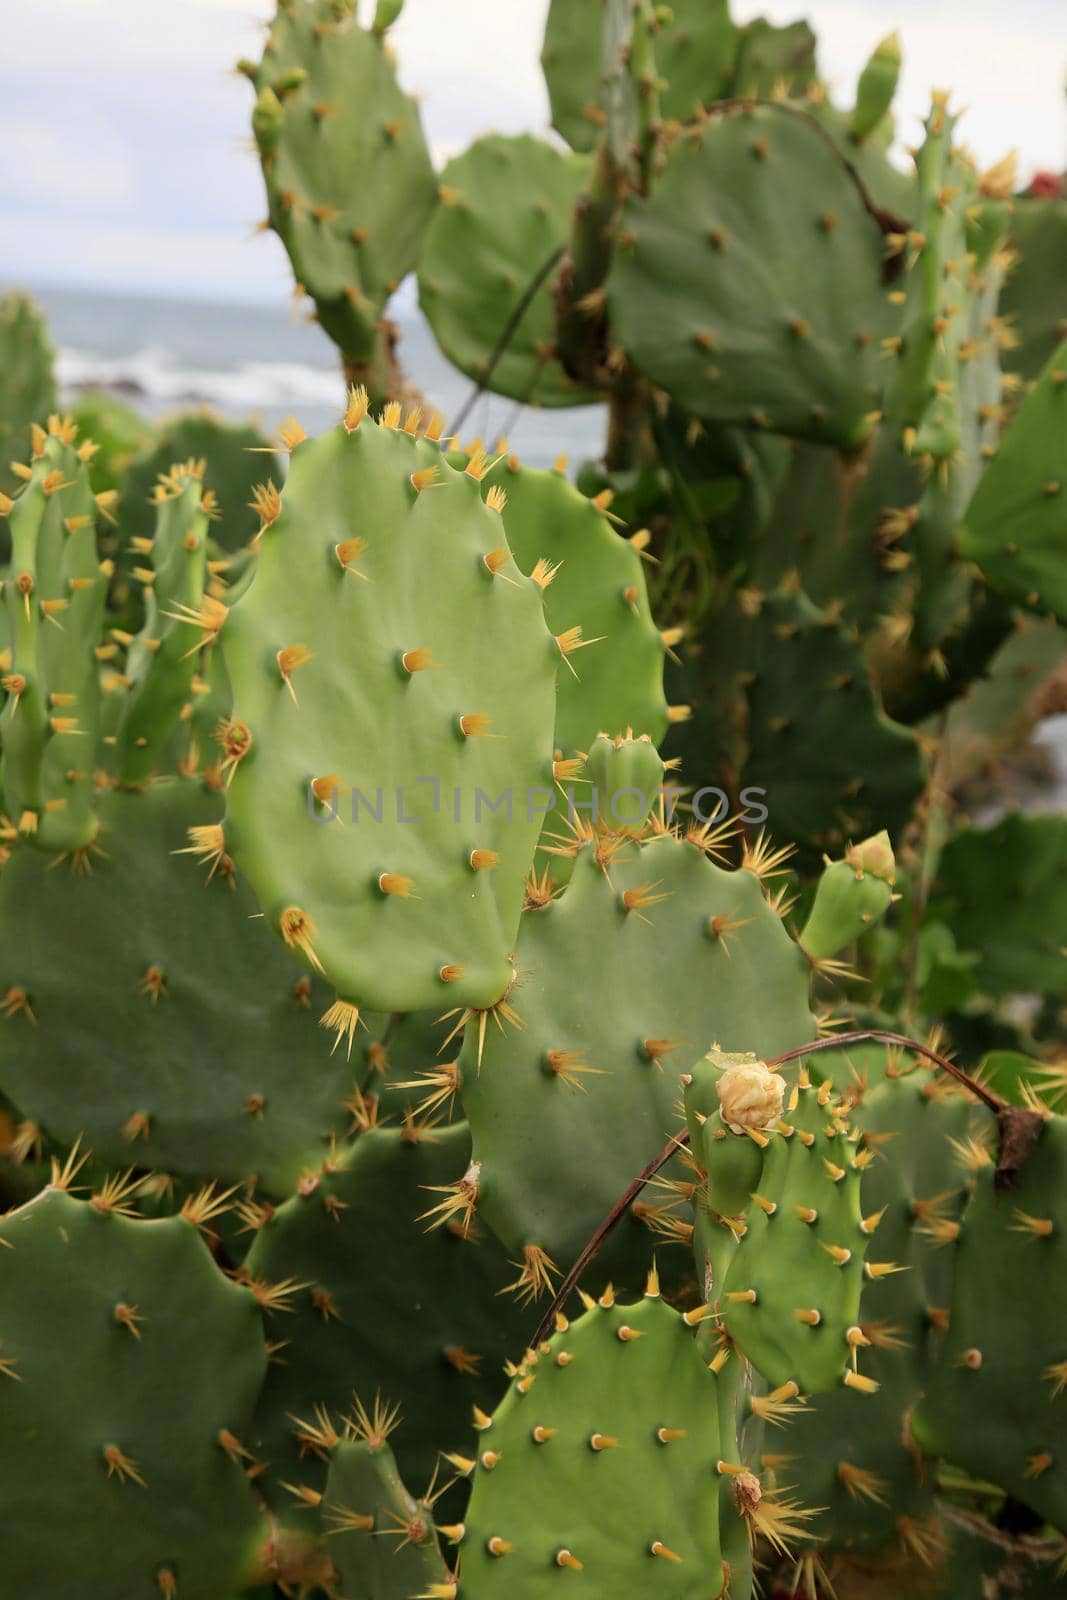 salvador, bahia, brazil - january 15, 2021: spines are seen on a cactus plant in the city of Salvador.